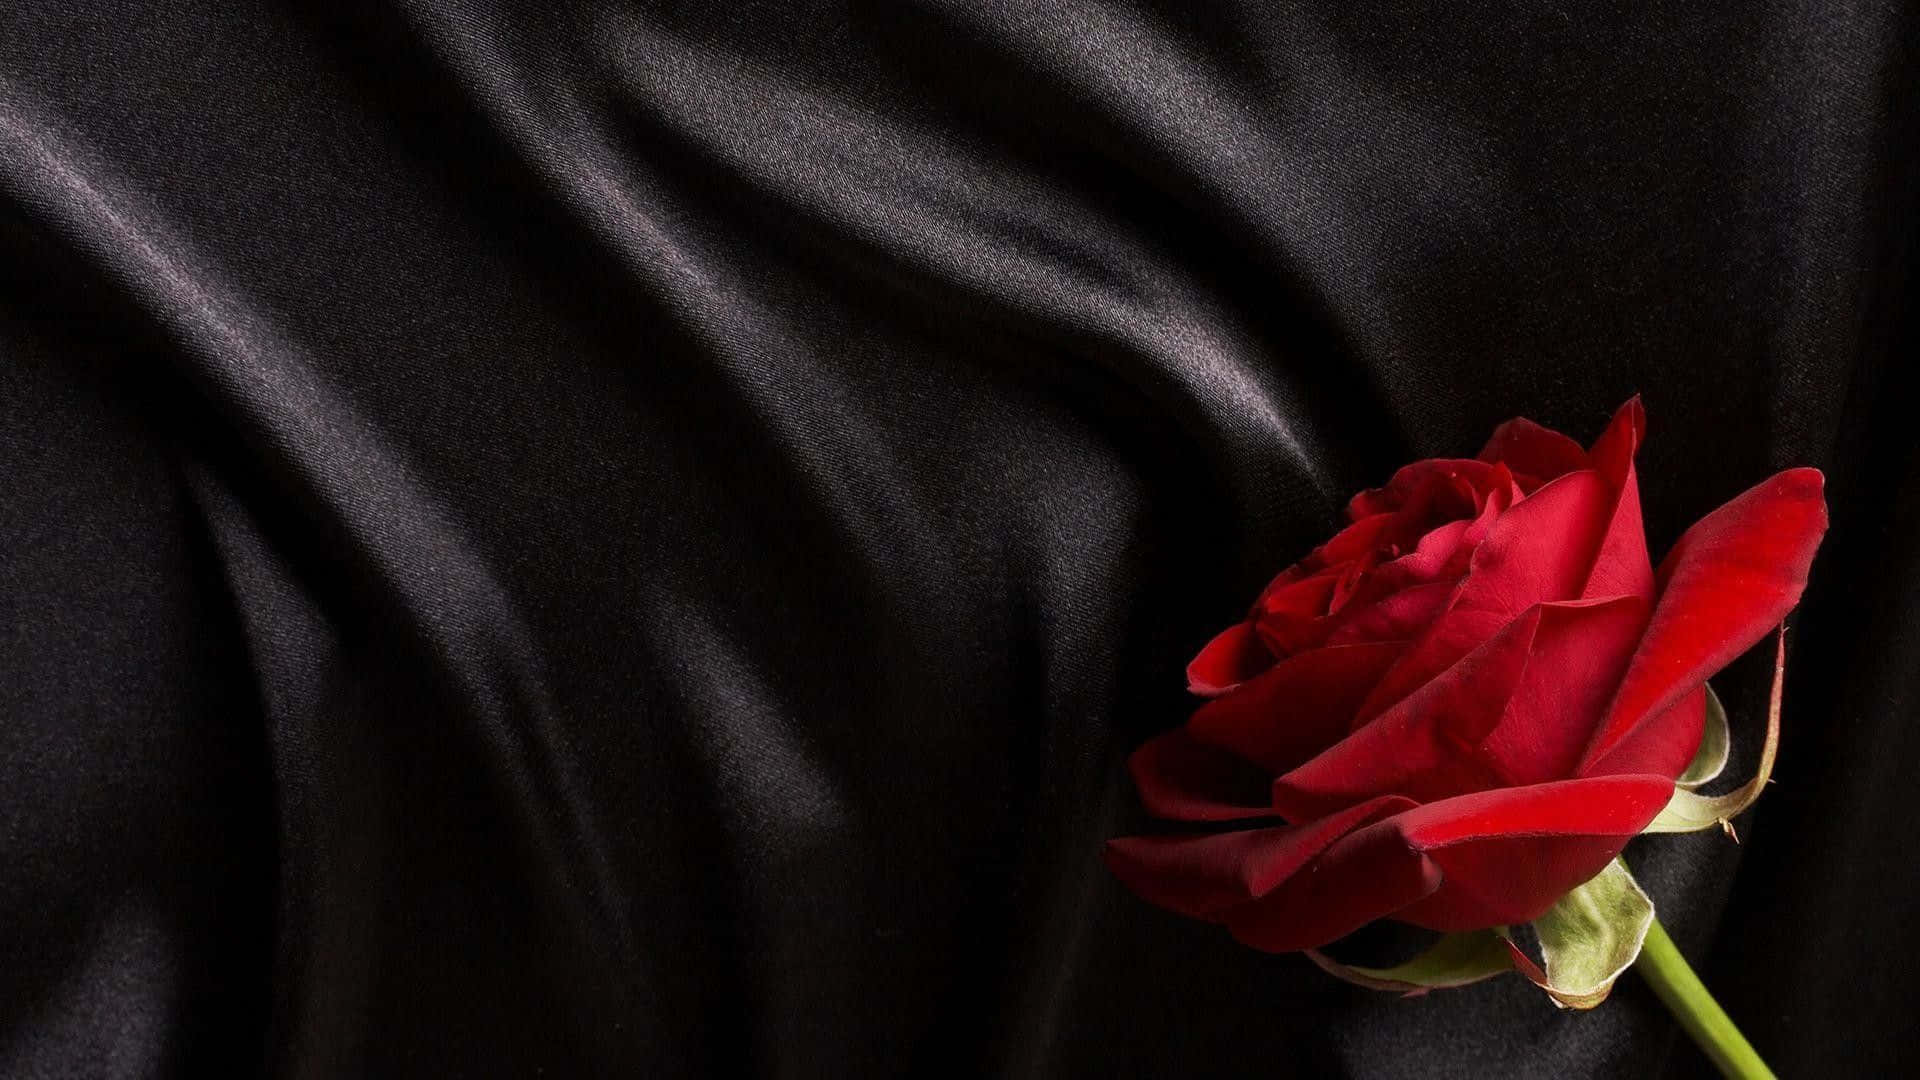 A black rose representing beauty and elegance Wallpaper